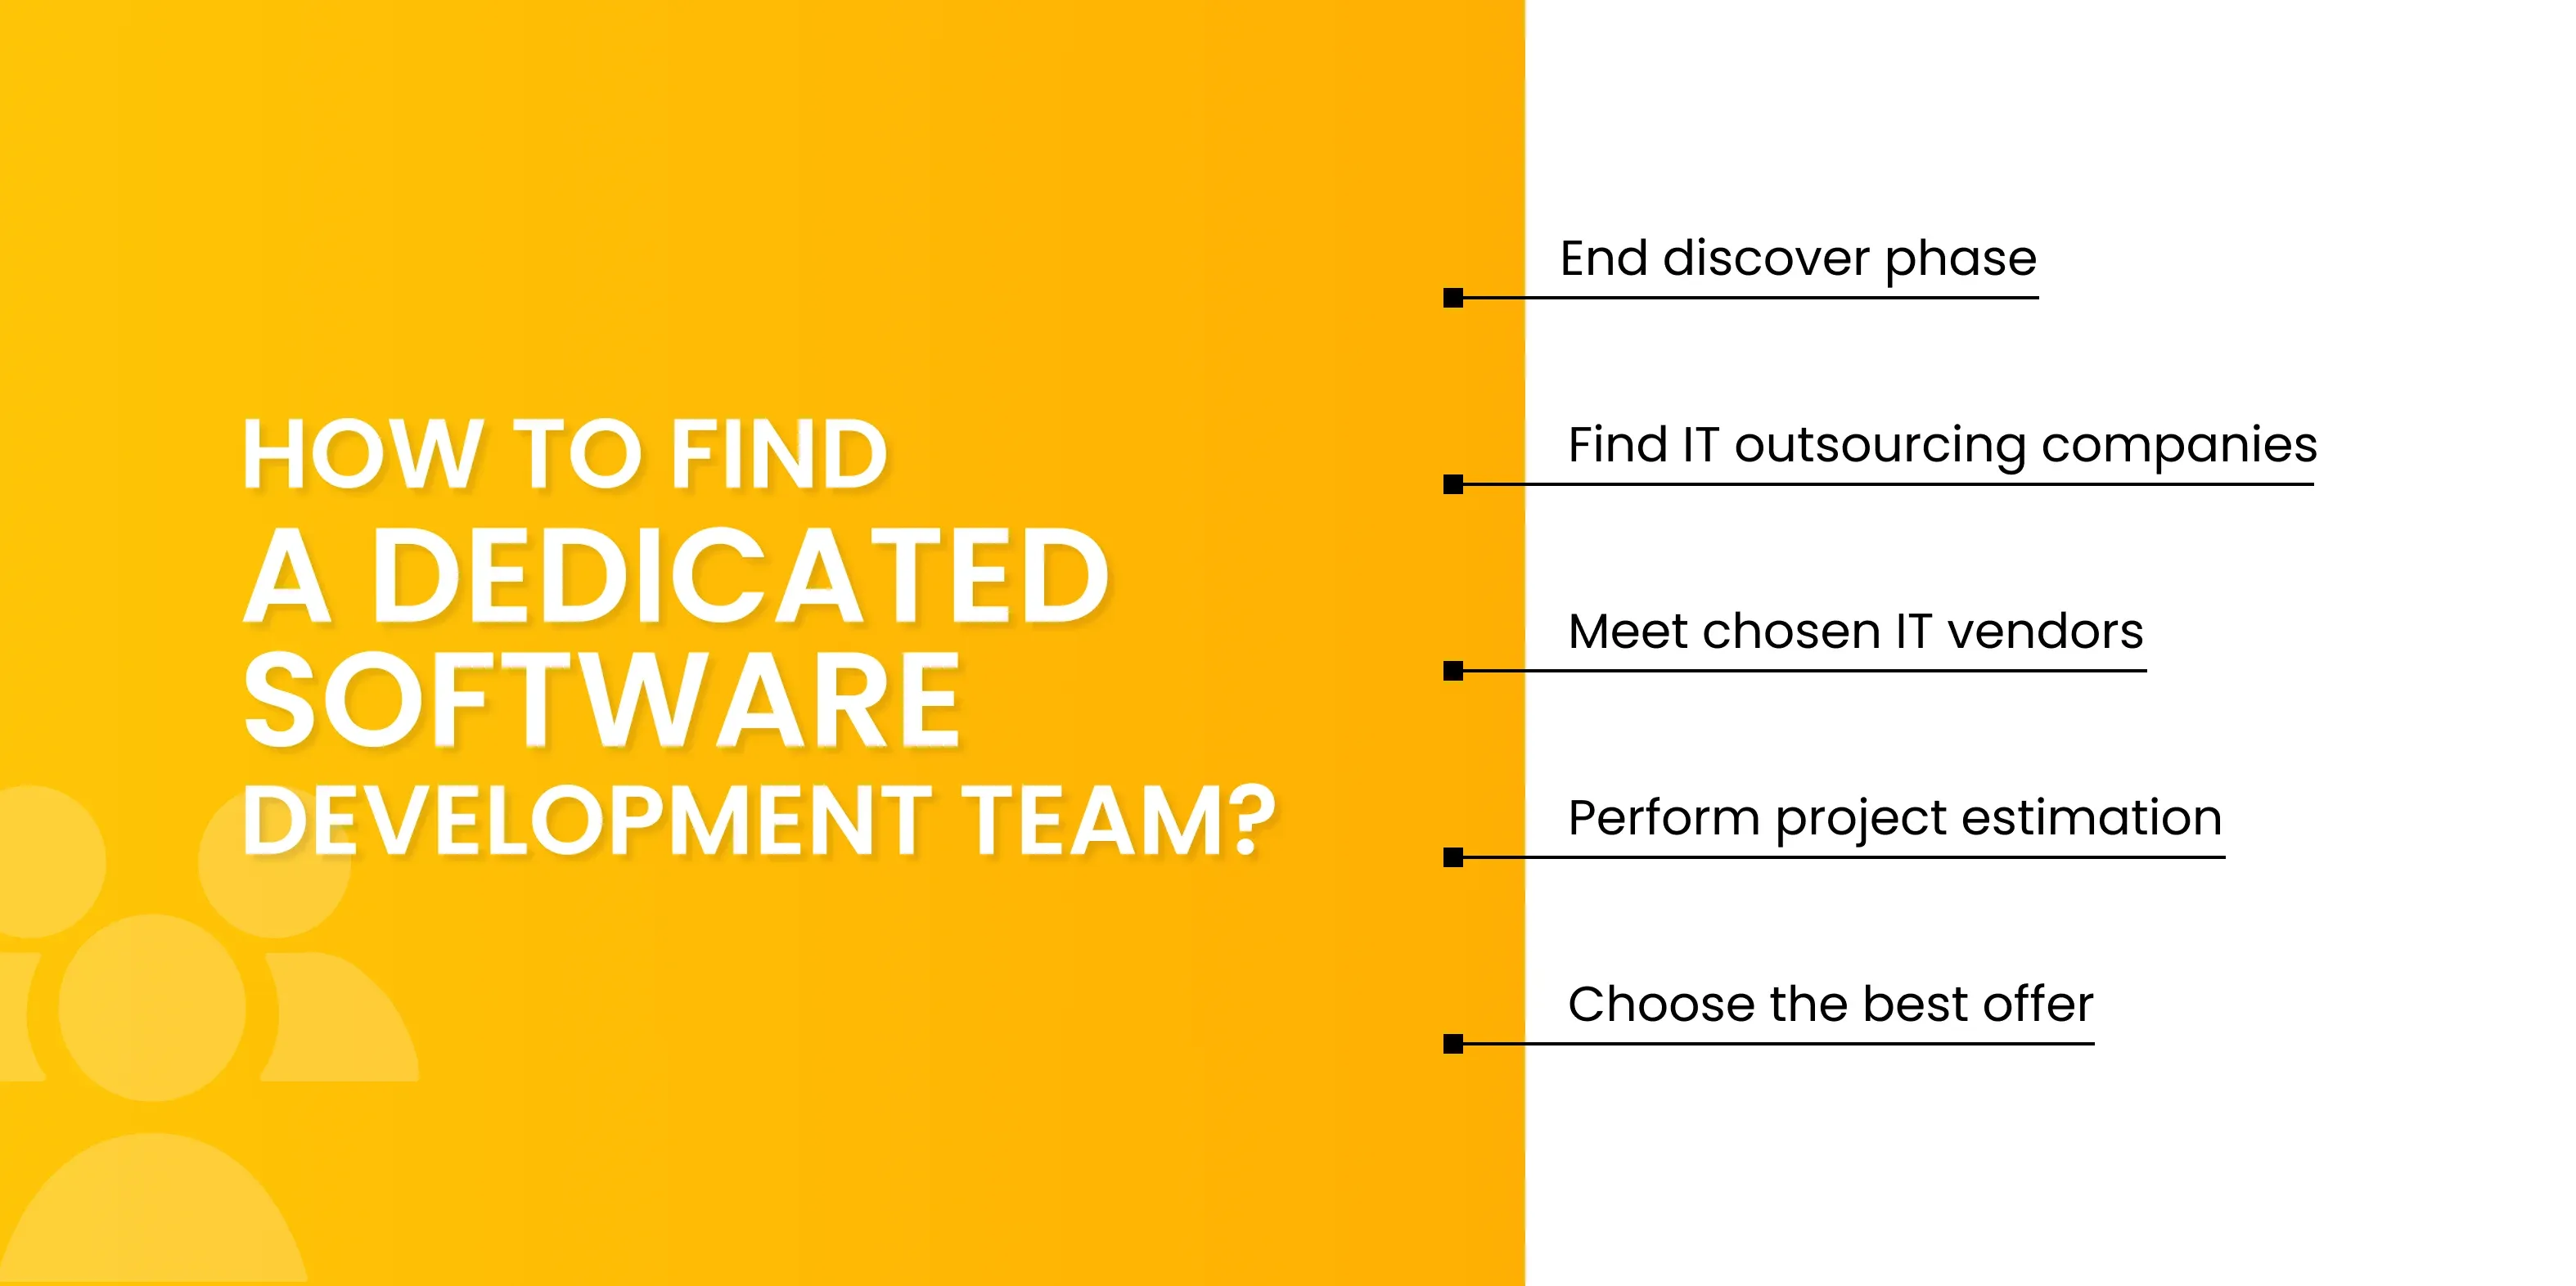 how to find a dedicated software development team?